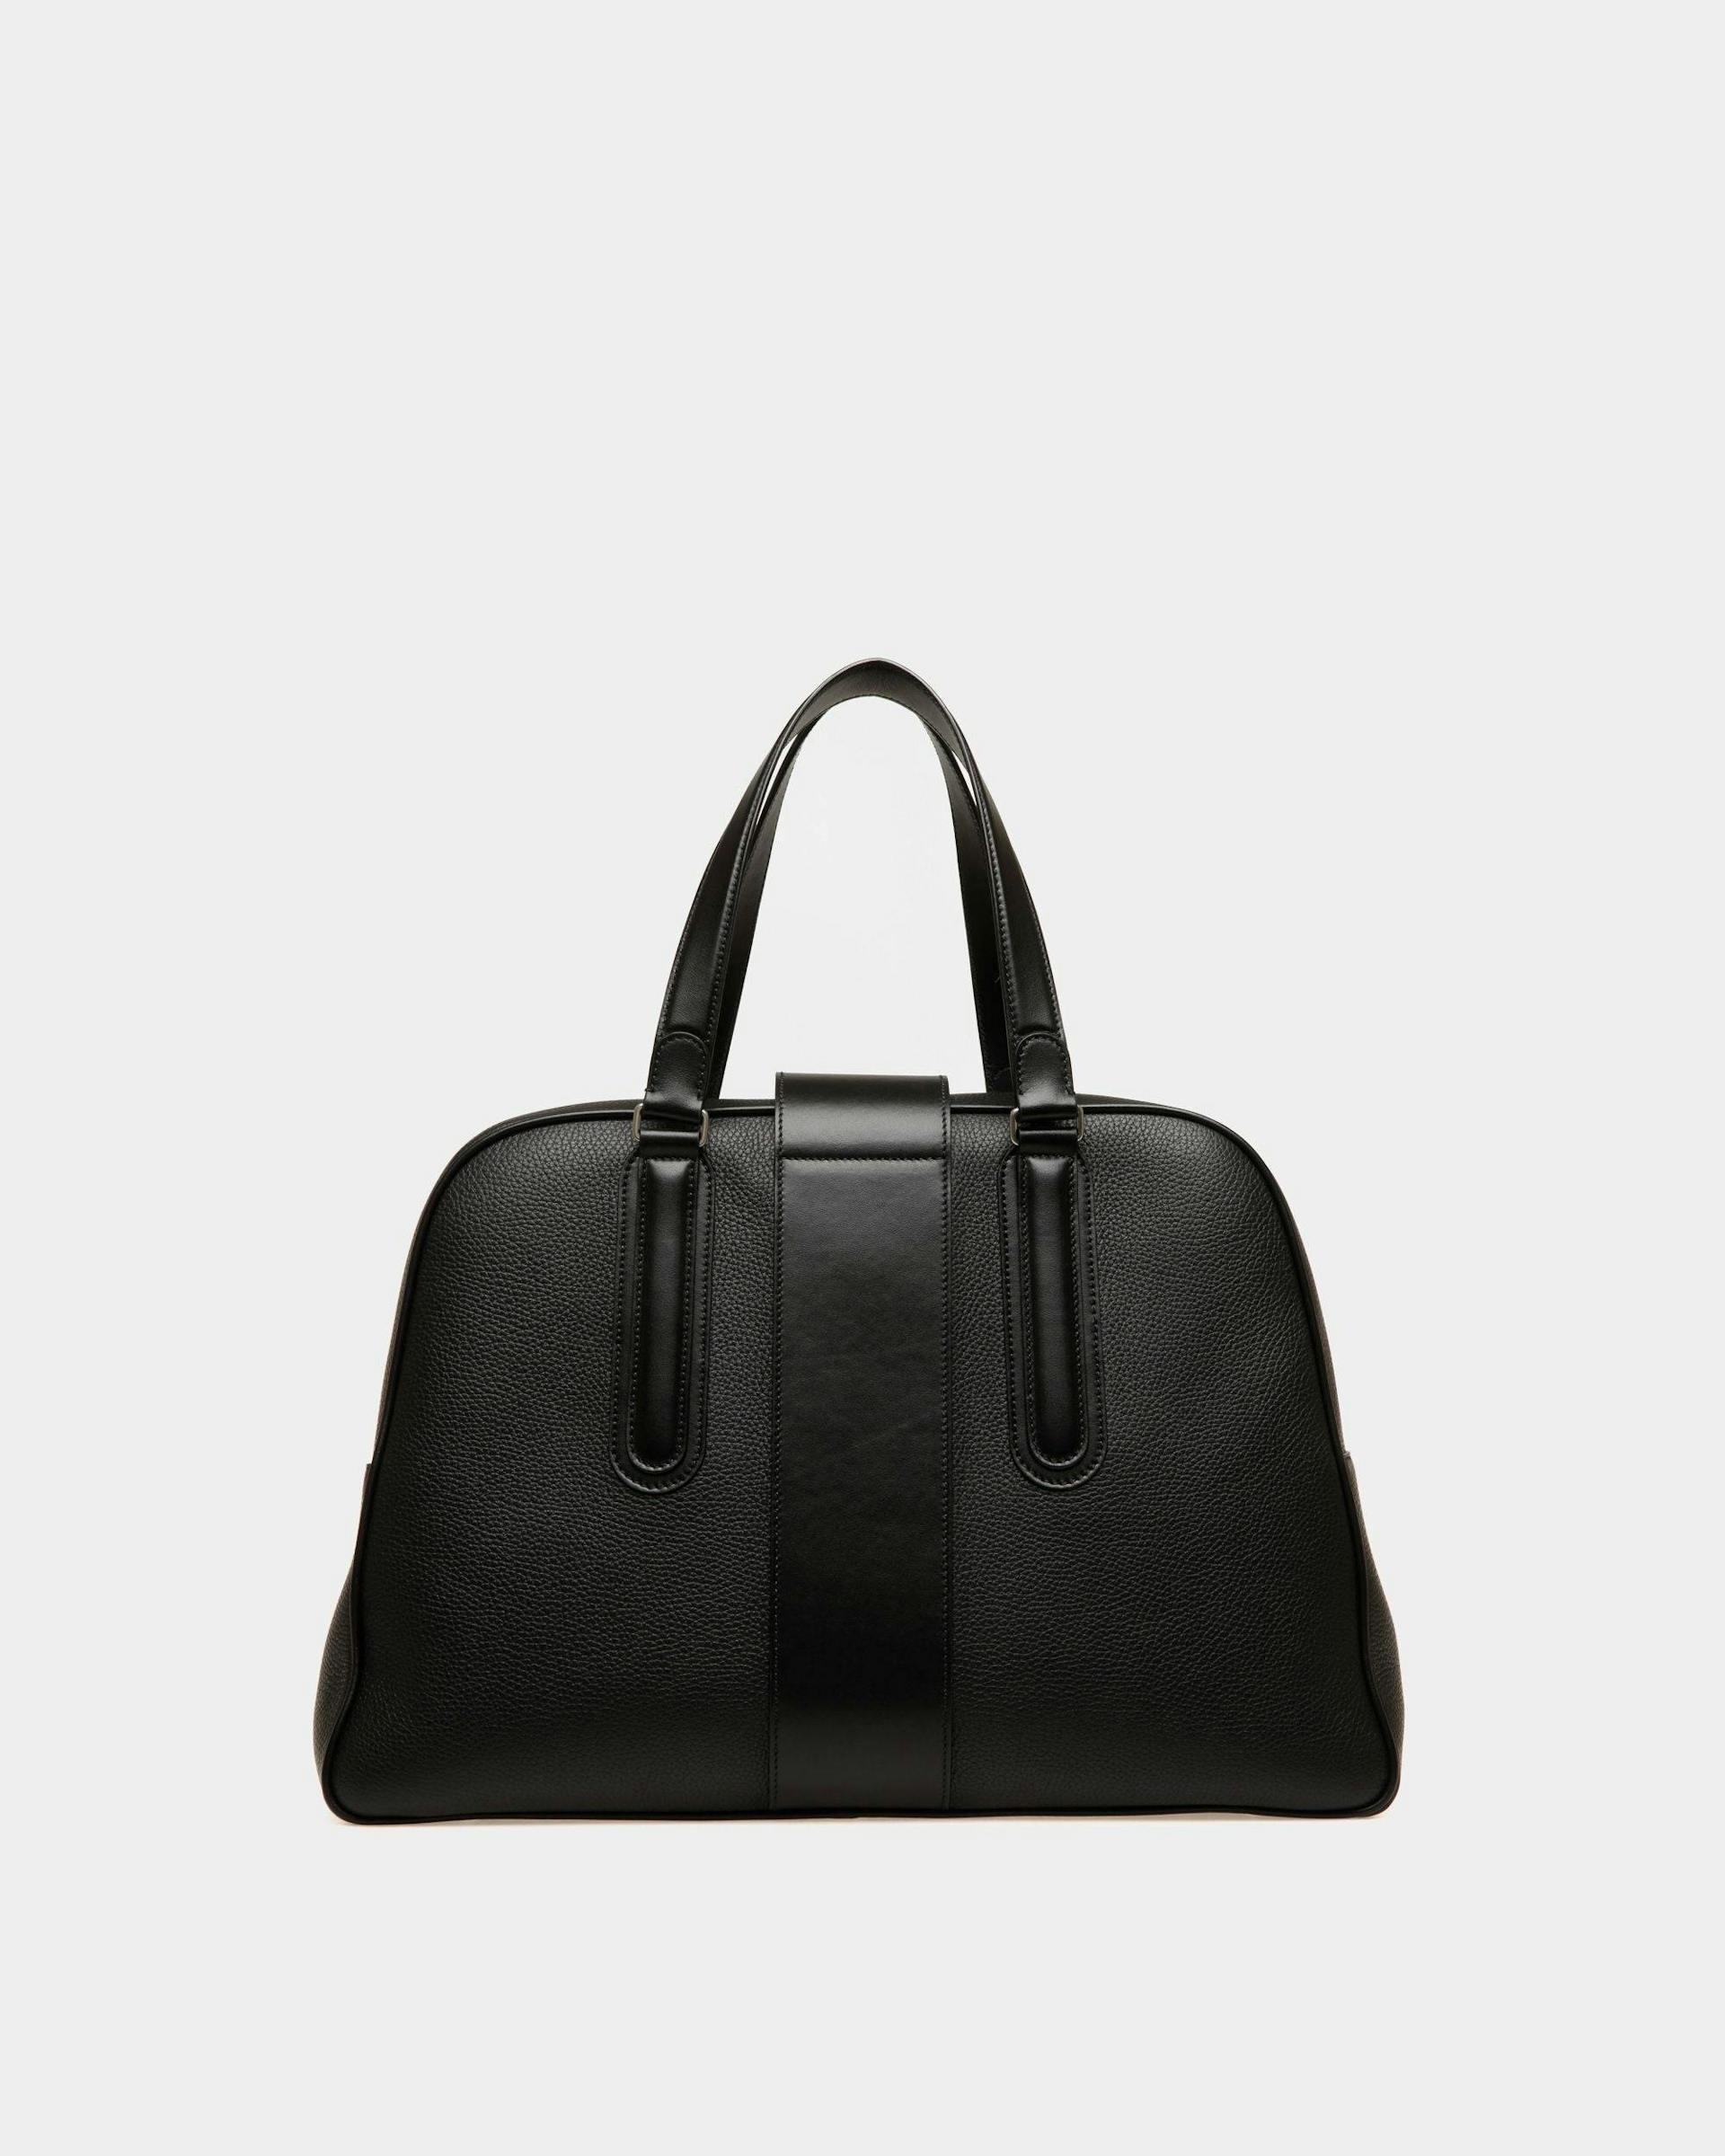 Bowling Bag In Black Leather - Men's - Bally - 03